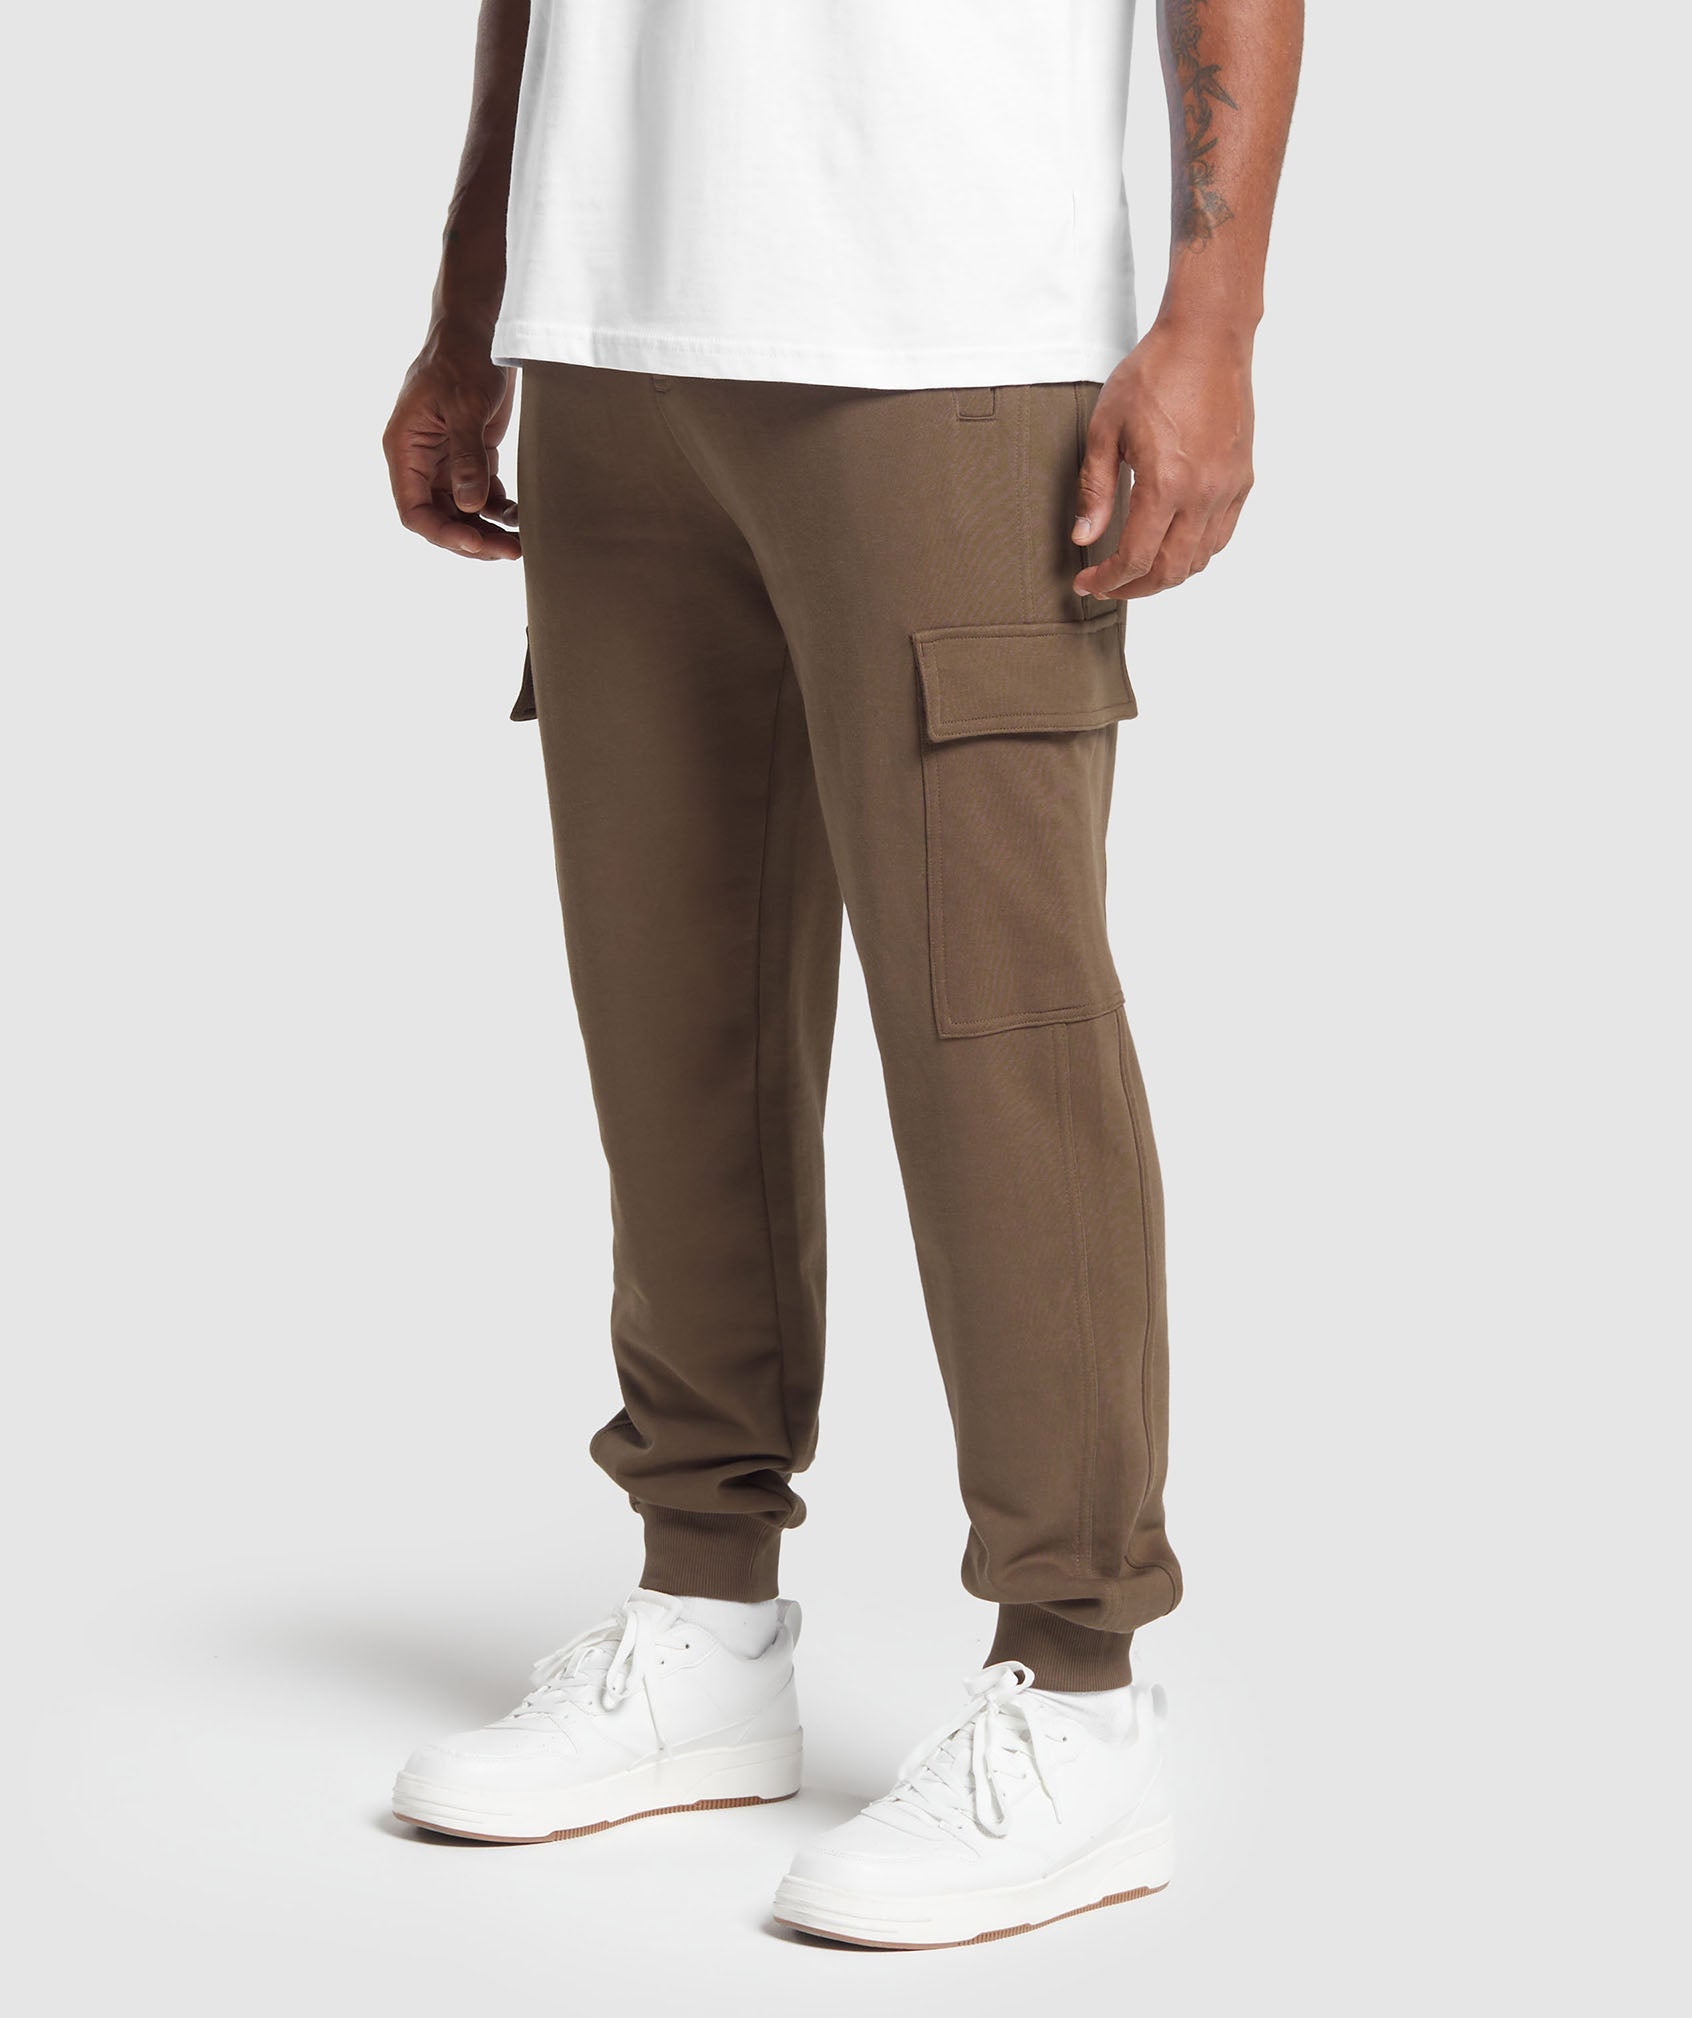 Rest Day Essentials Cargo Joggers in Penny Brown - view 3